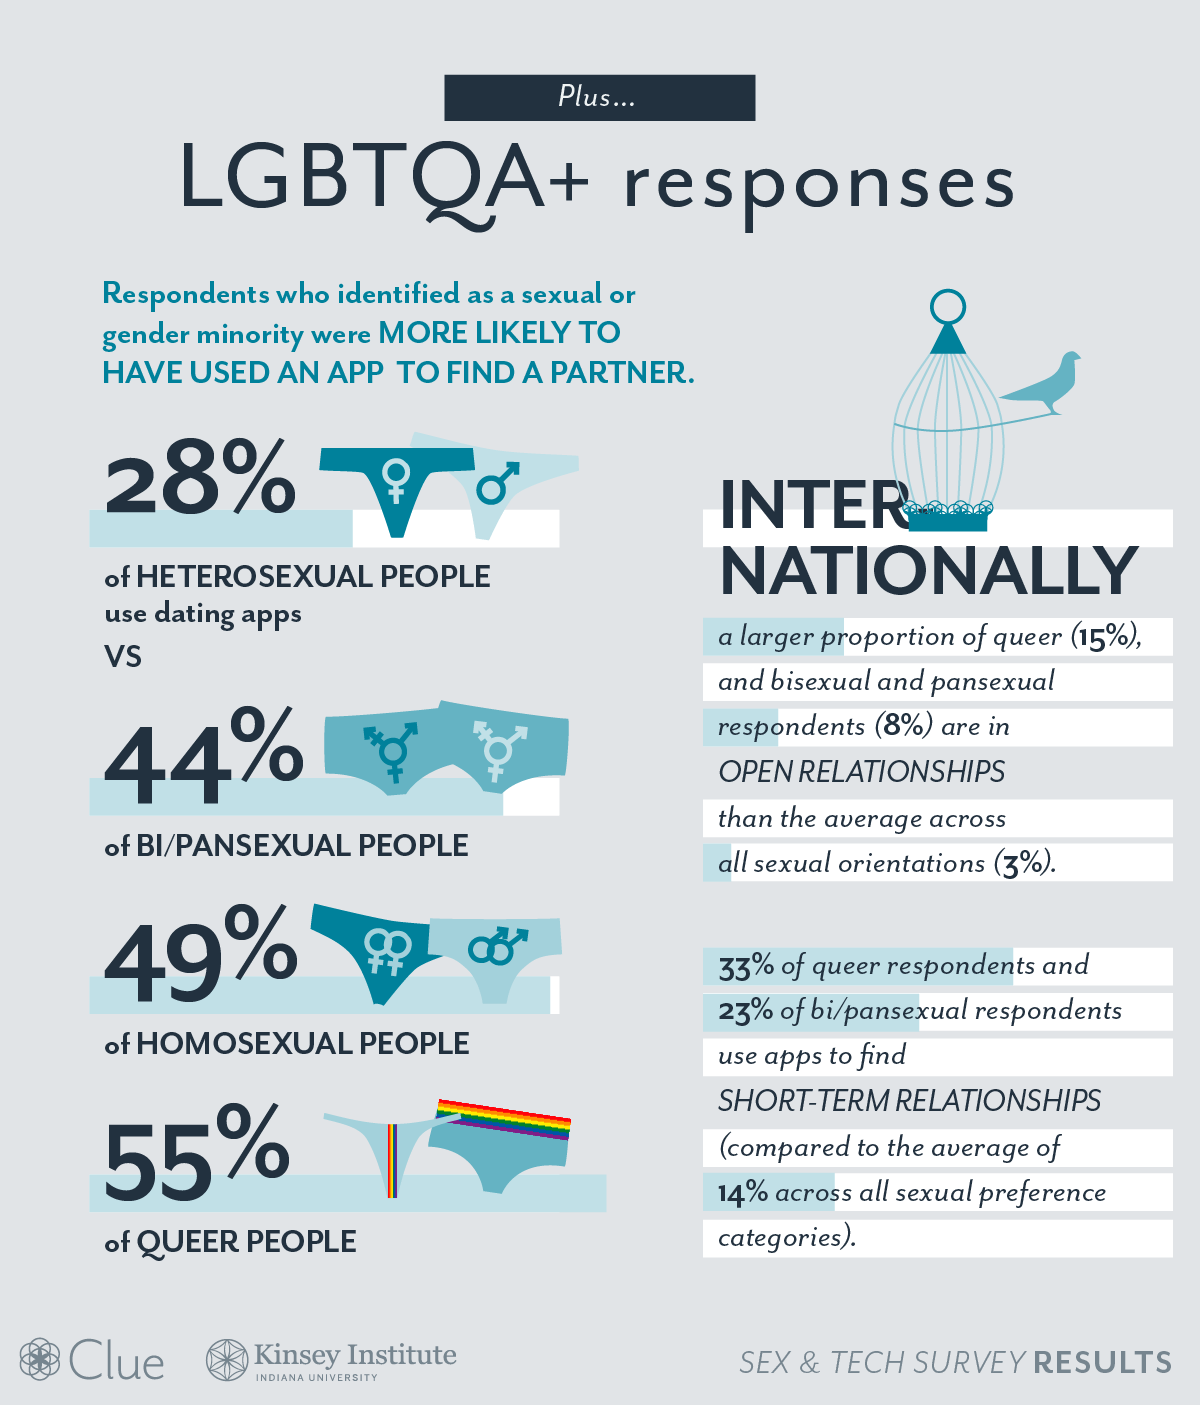 infographic on international lgbtqa responses to the sex and tech survey